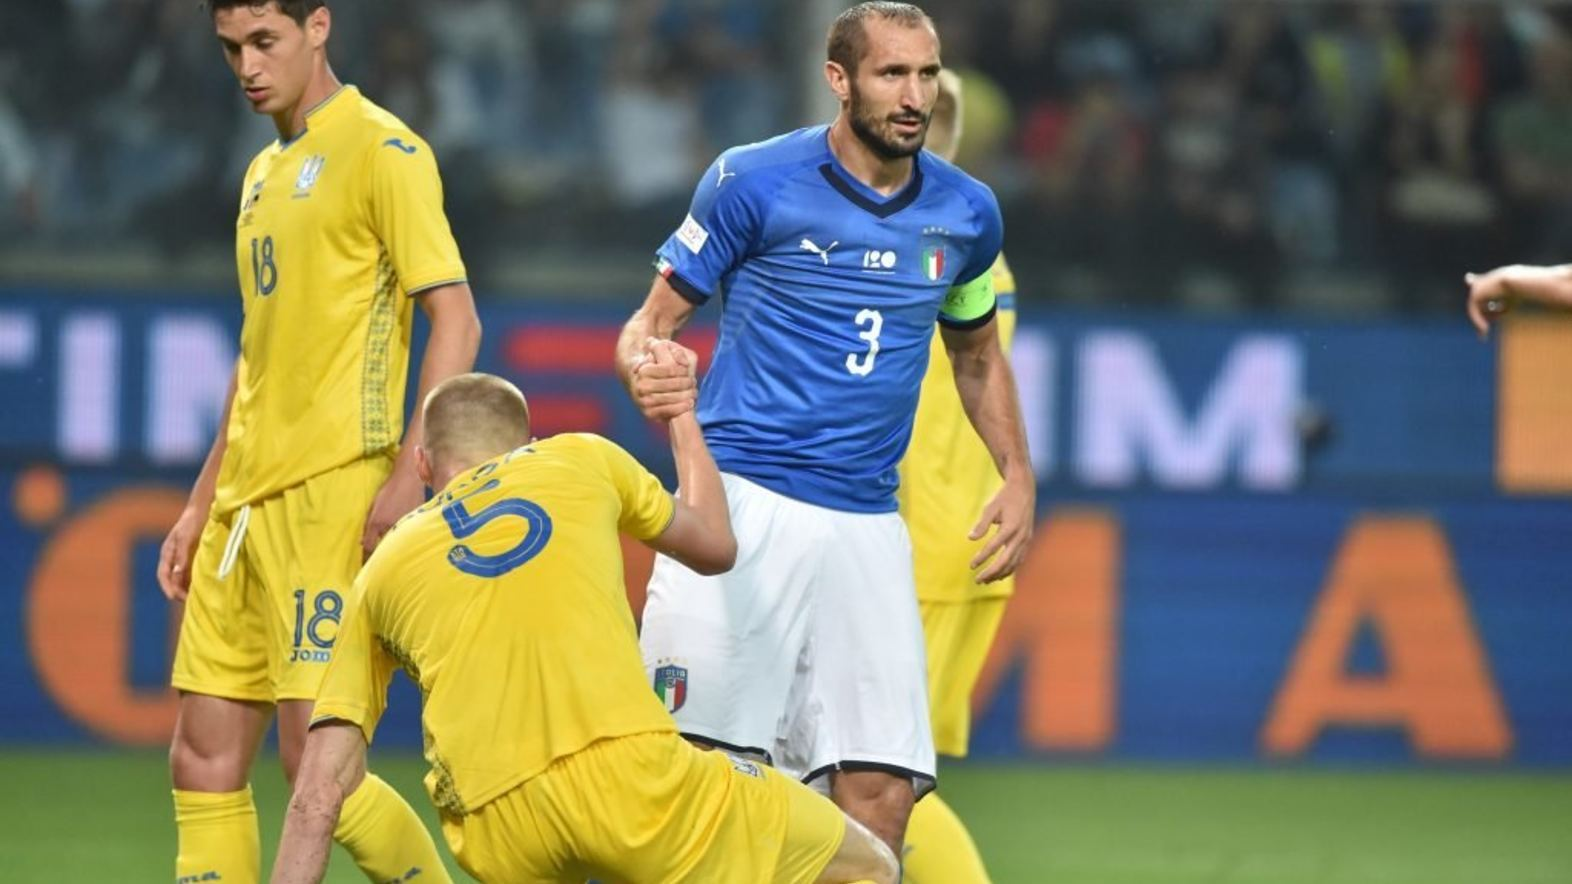 On a visit to a difficult team of Italy: the Ukrainian national team will play a difficult match today